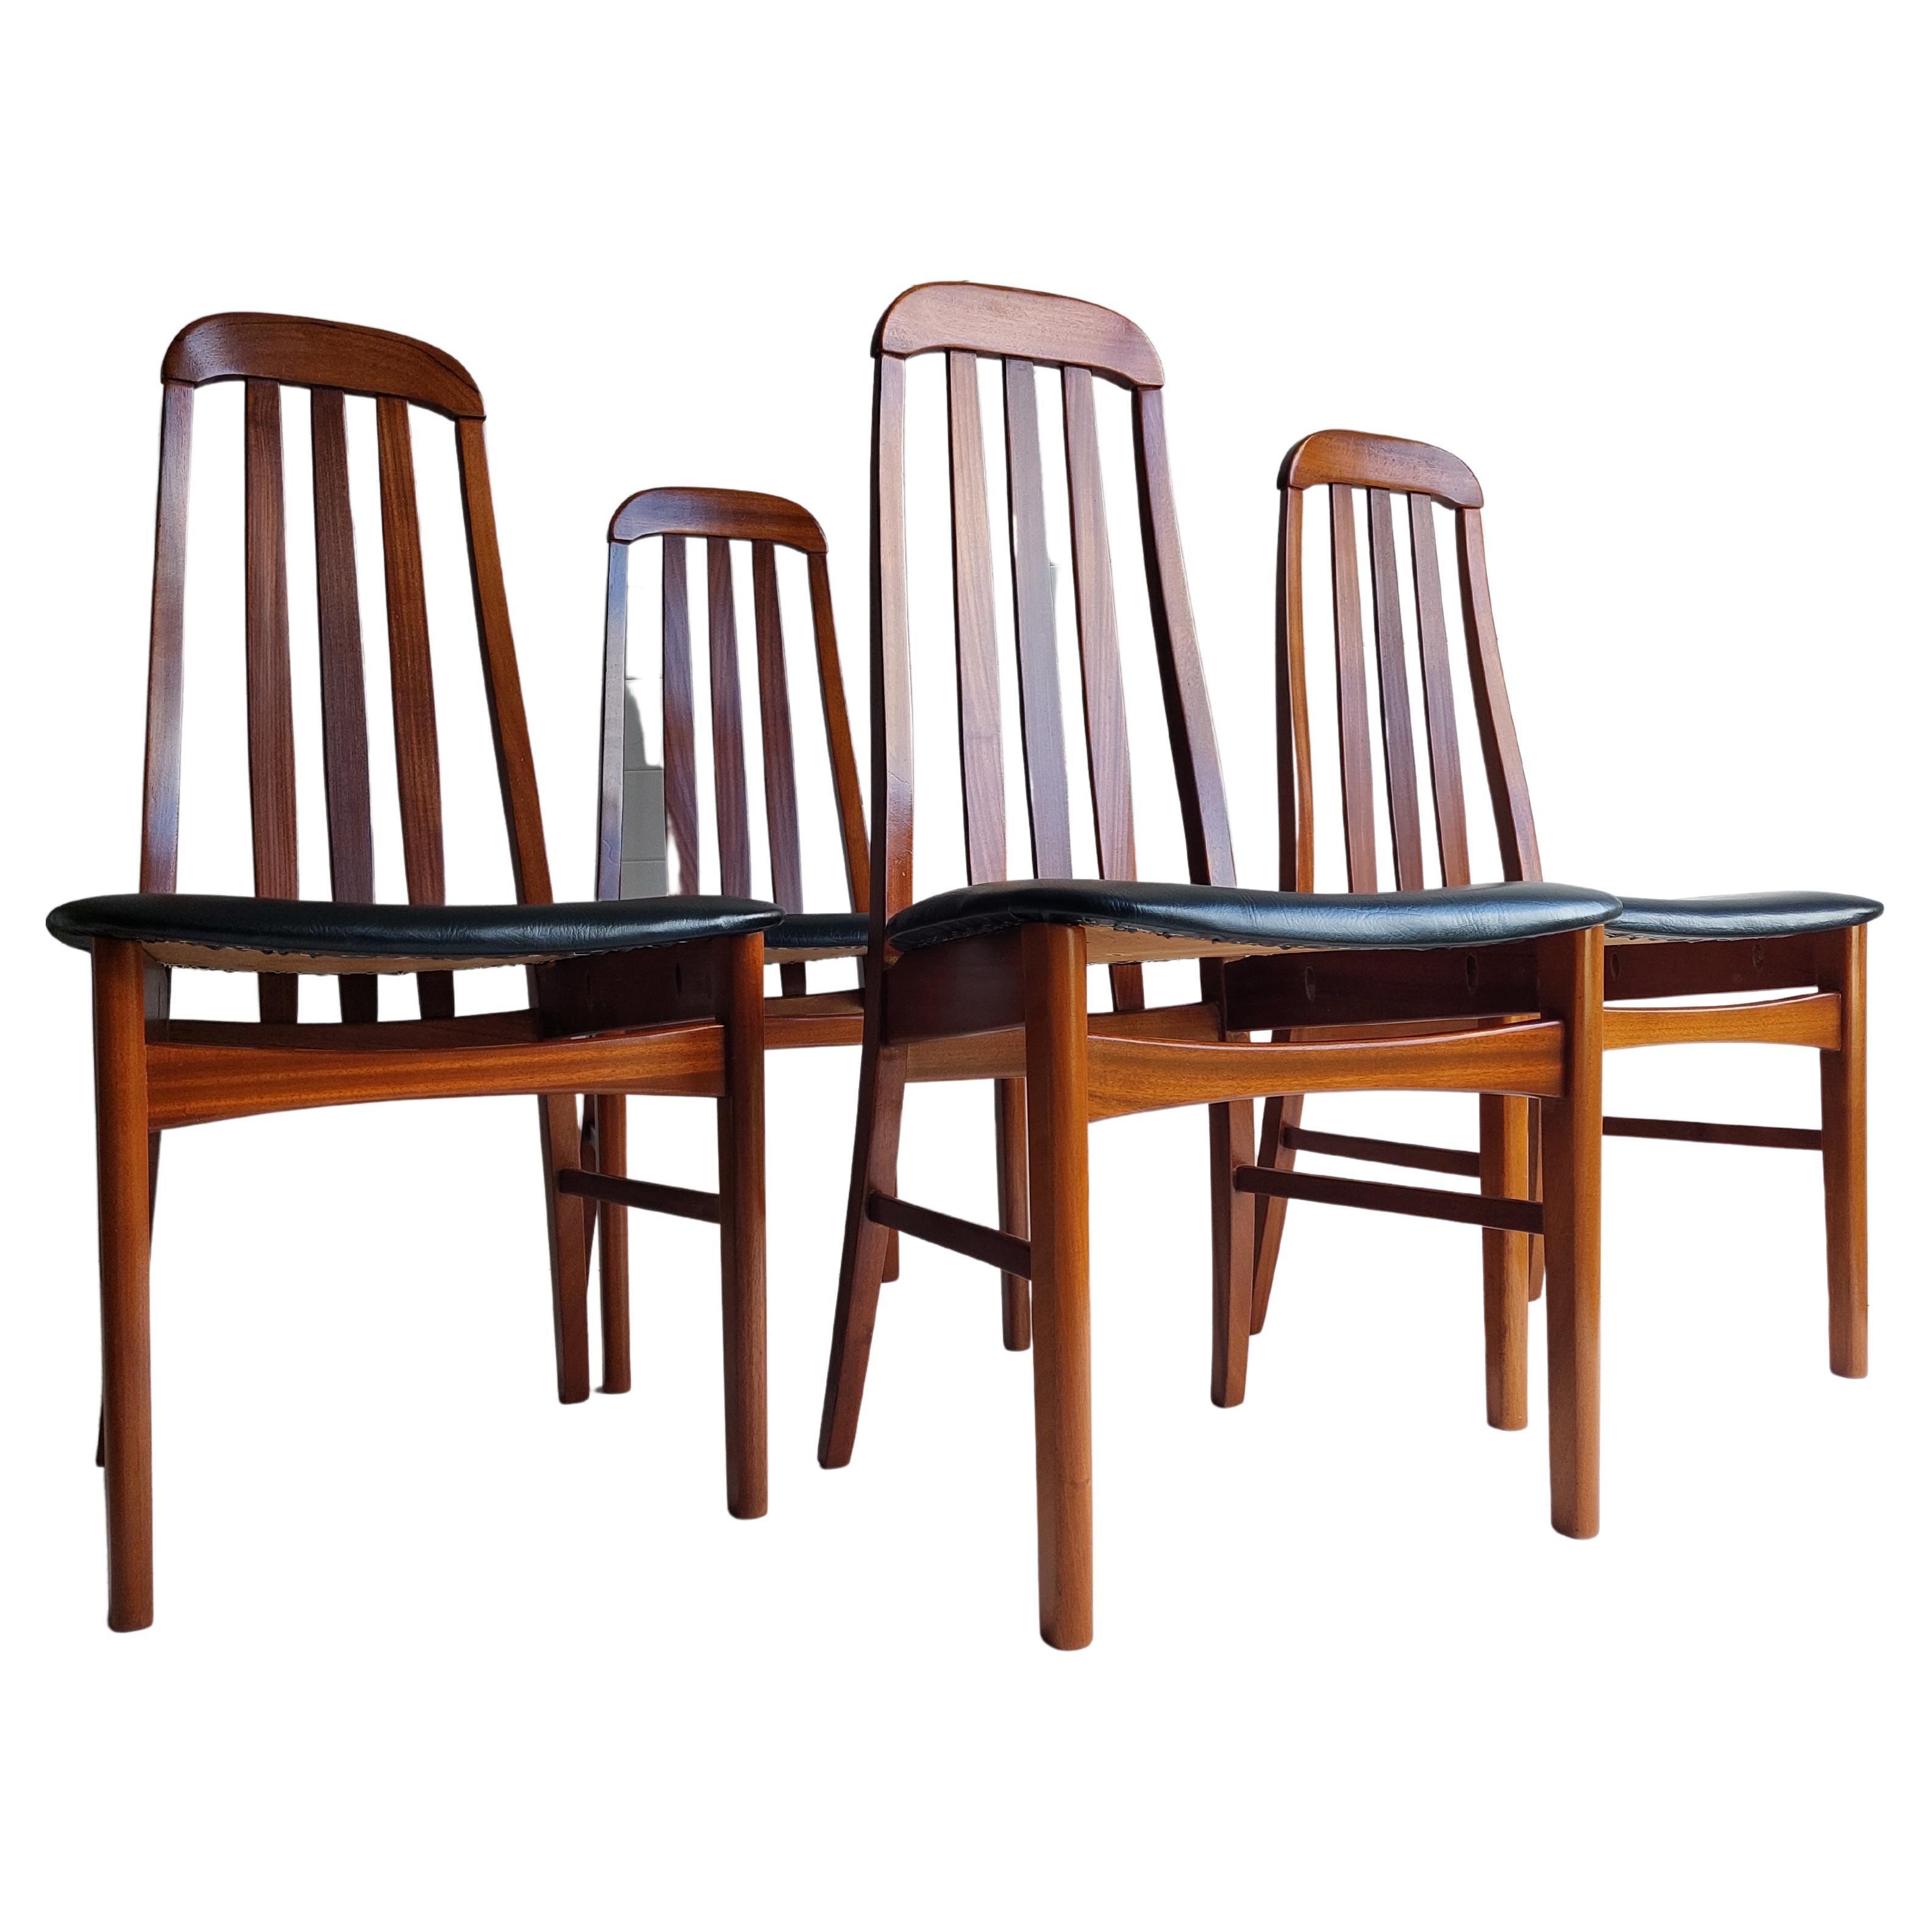 Mid entury Teak Dining Chairs by Jentique Niels Koefoed Style, 1970s Set of 4